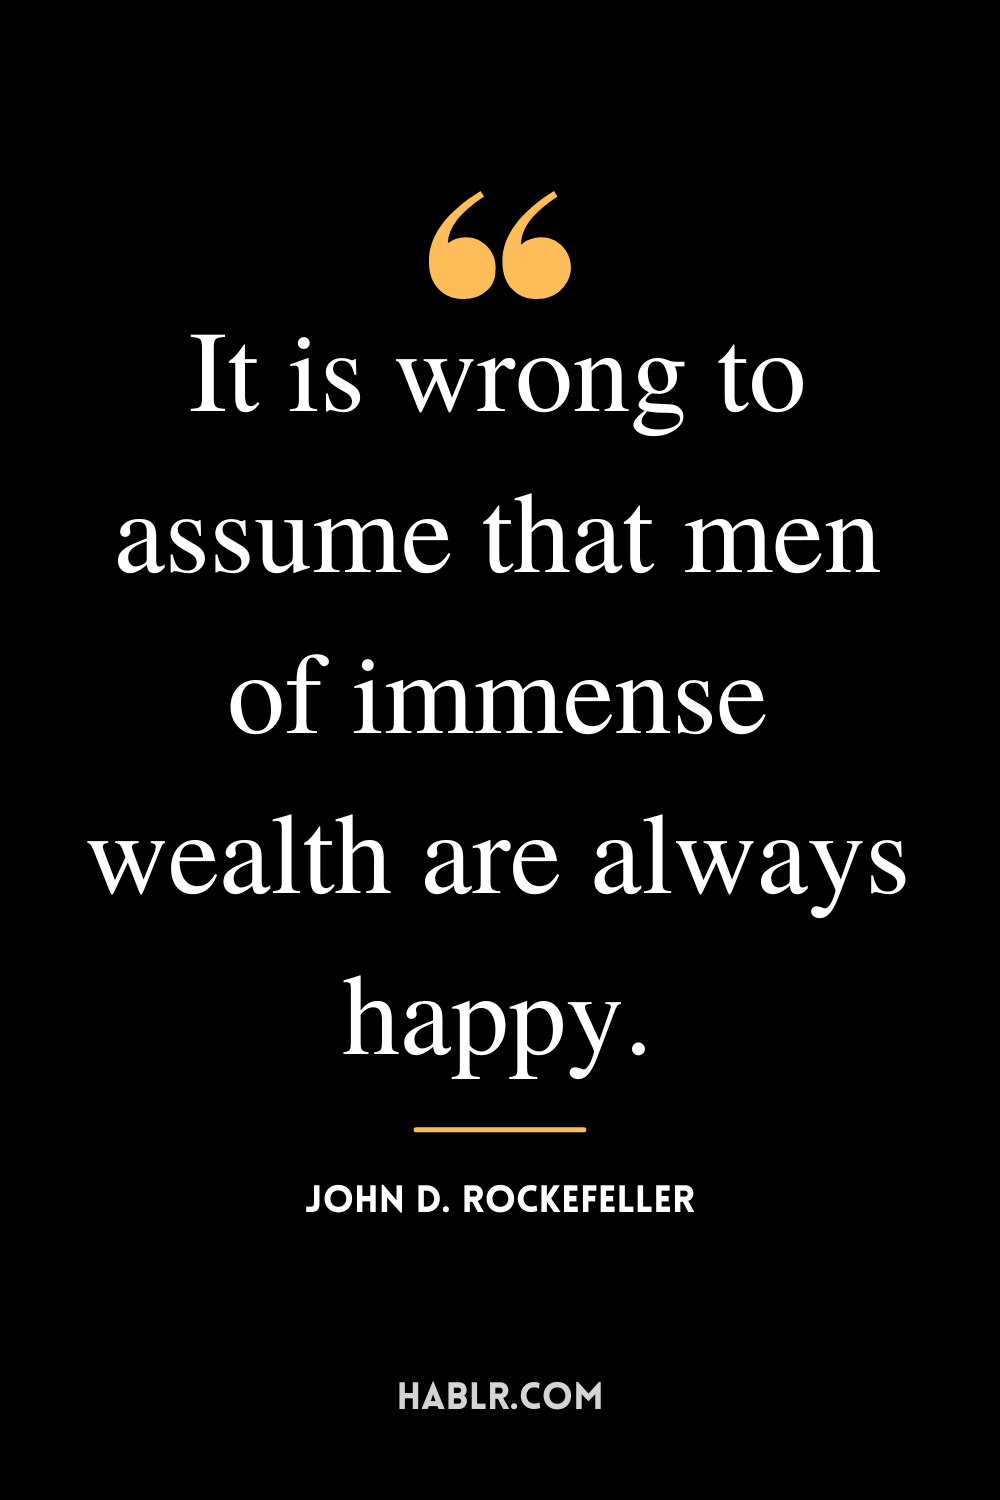 “It is wrong to assume that men of immense wealth are always happy.” -John D. Rockefeller